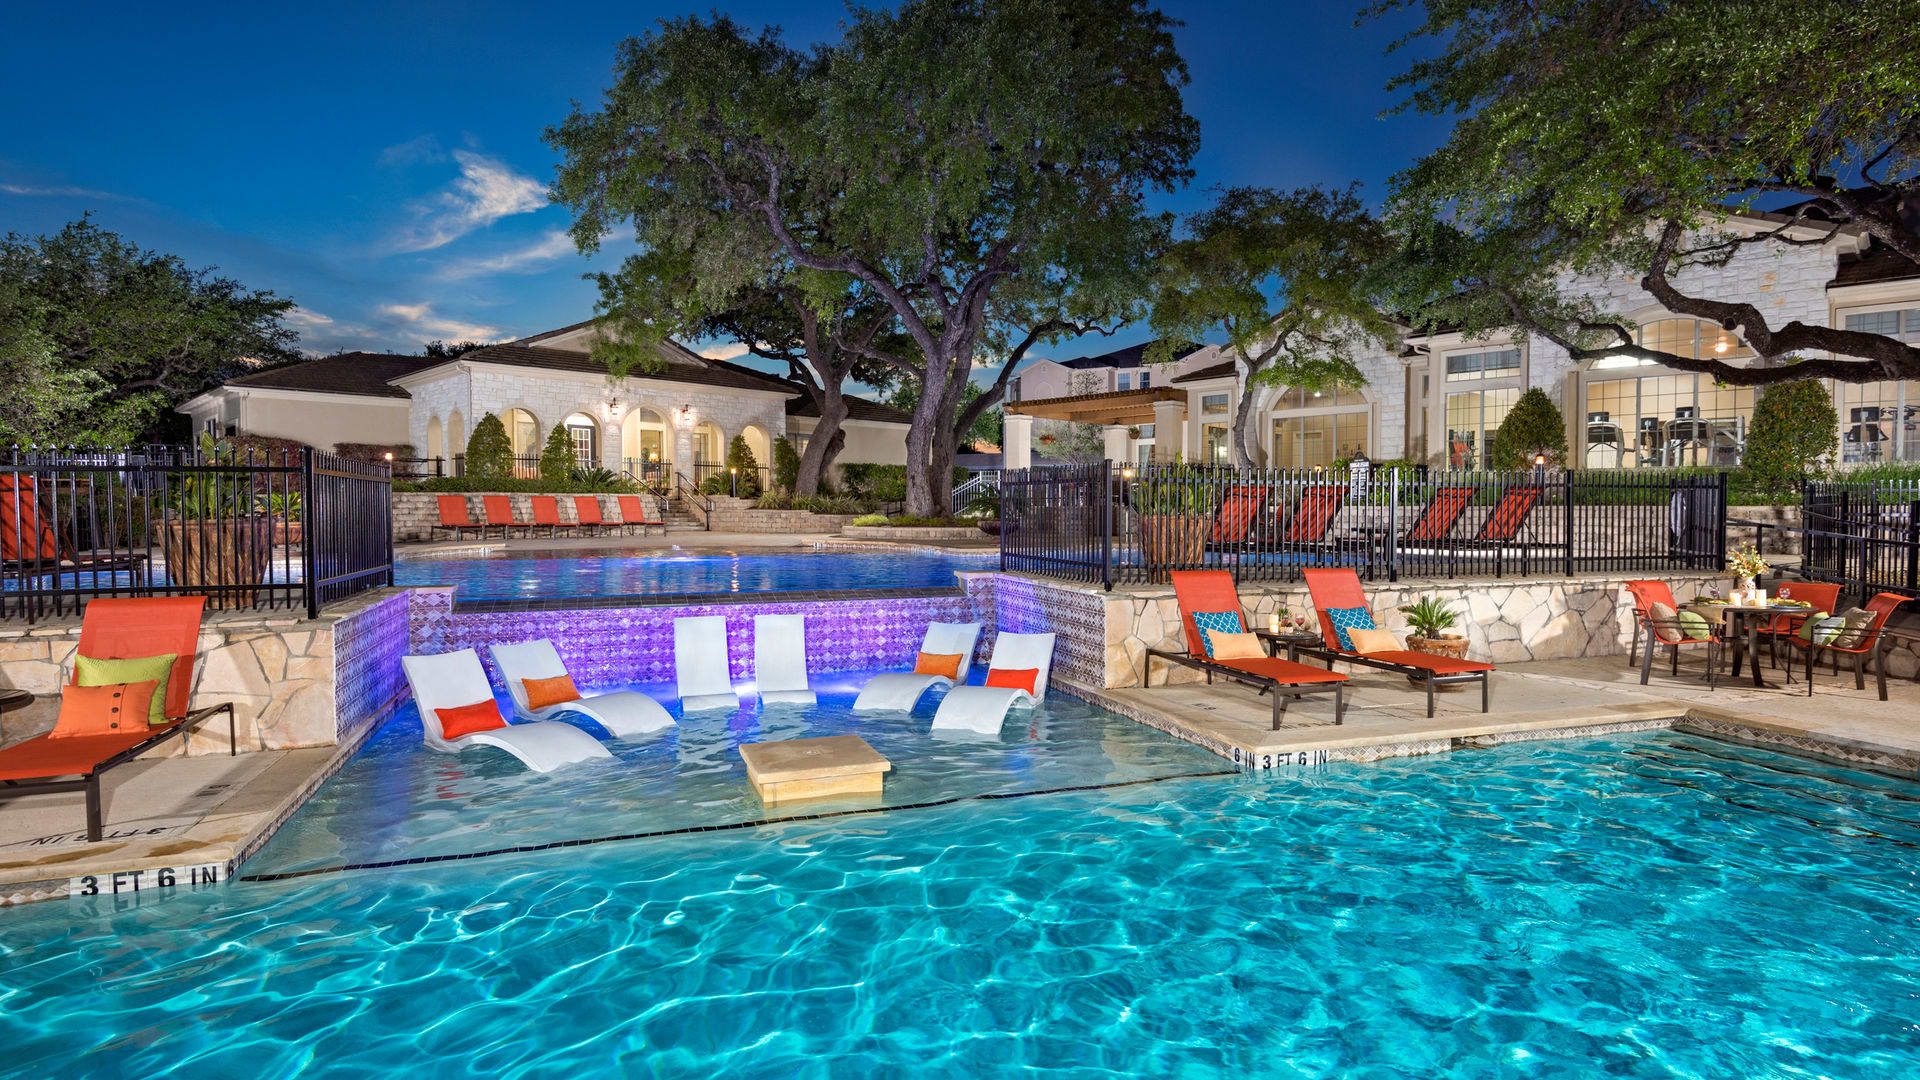 A luxury pool with lounge chairs at a Management Support community